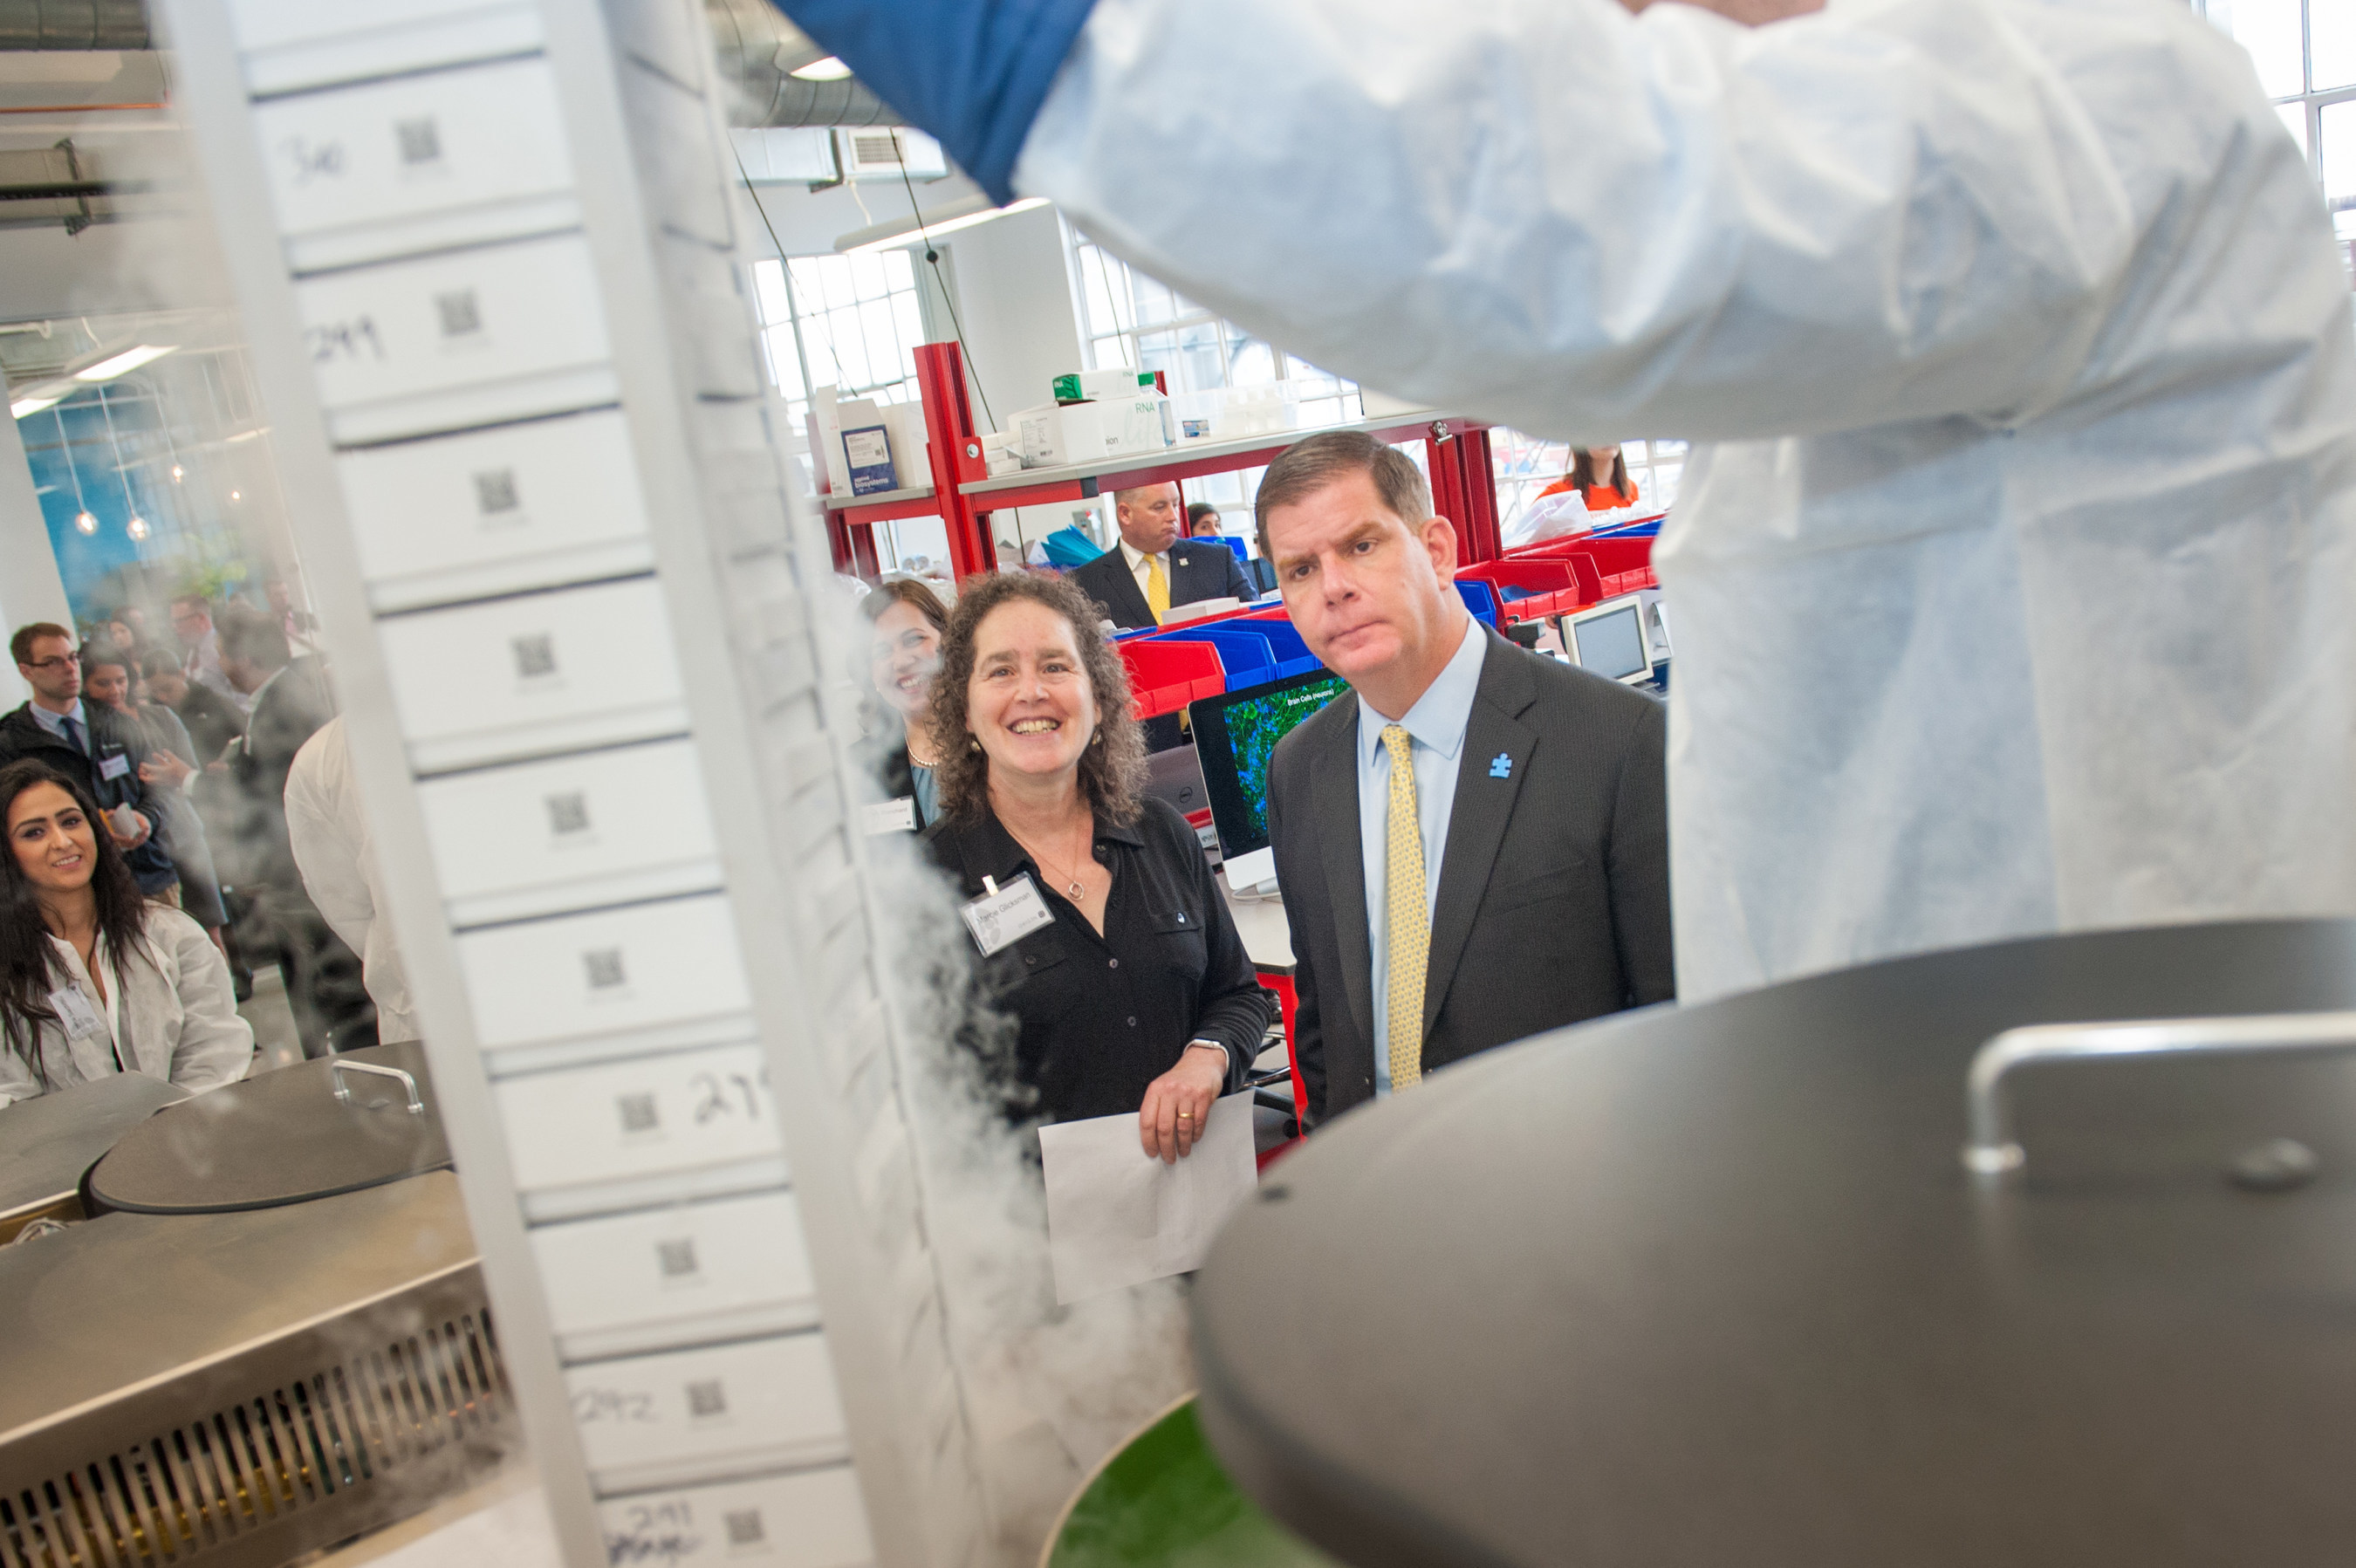 Mayor Martin J. Walsh viewed the contents of ORIG3N's LifeCapsule, the world's largest biorepository of induced pluripotent stem cells (iPSCs), during a lab tour with Marcie Glicksman, VP of Biology at ORIG3N. ORIG3N is the only biotechnology company that is crowdsourcing blood samples to understand the cellular and molecular foundations of disease. ORIG3N's new facility will help accelerate the next stage of evolution with iPSC technology.